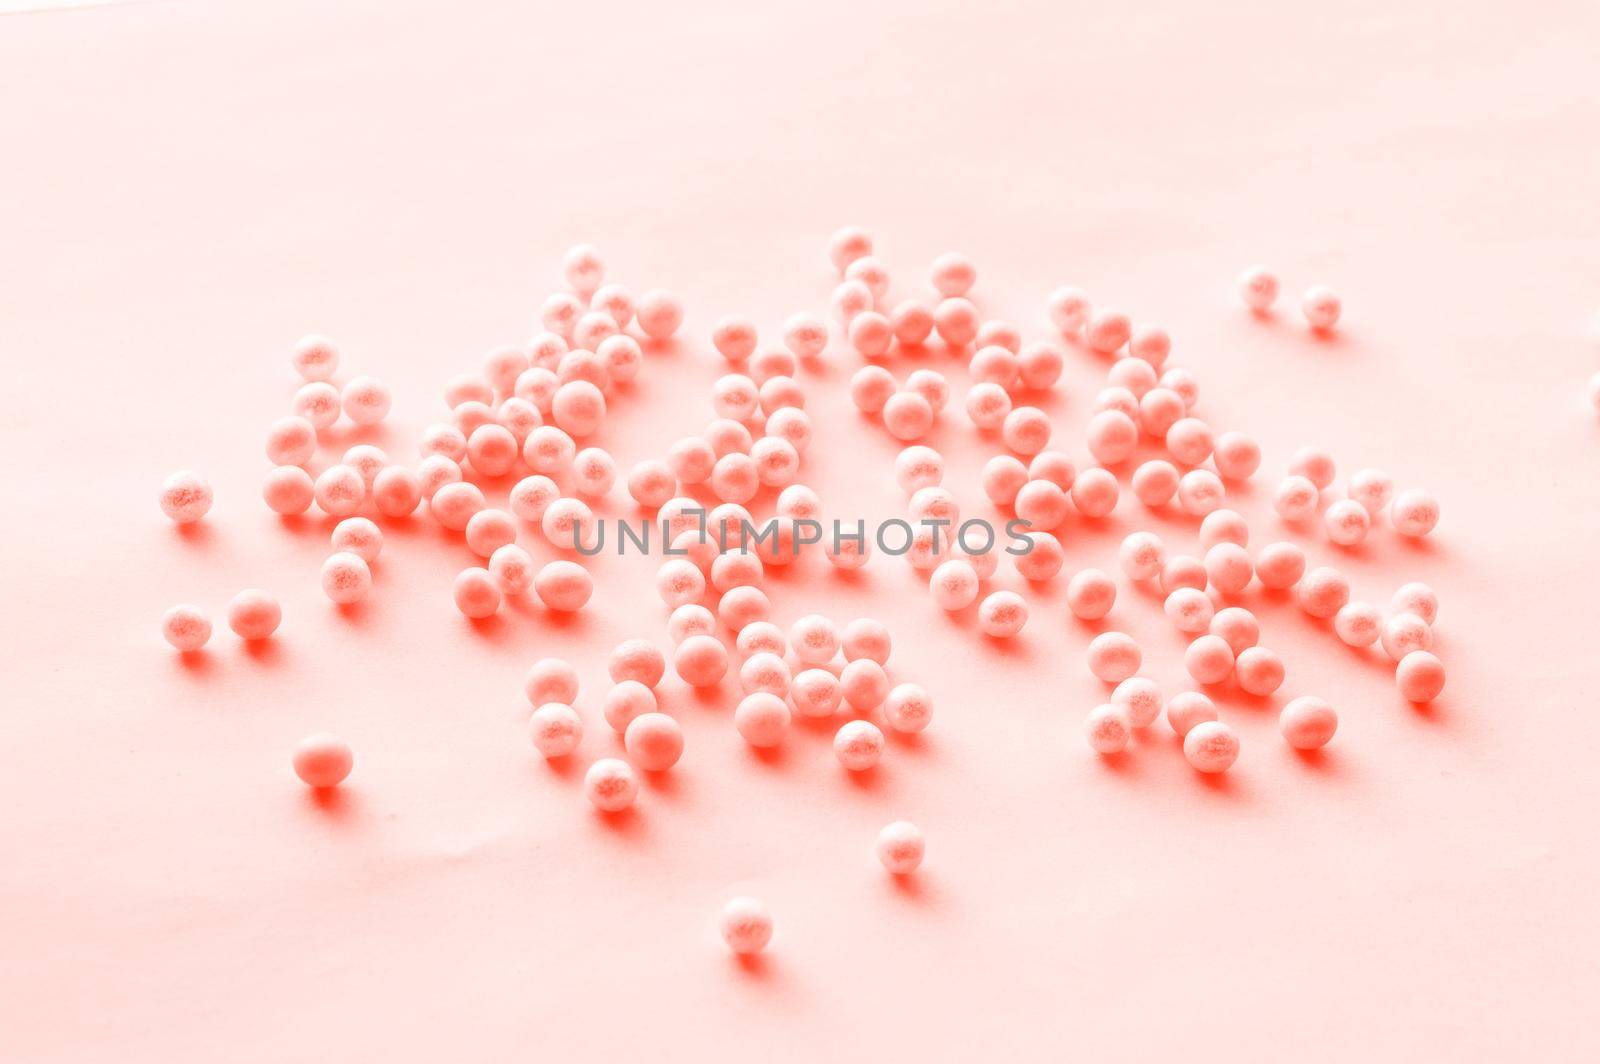 Romantic pattern of pink tinted beads scattered on a soft pink background, festive pattern for wedding design close-up. Hobby, craft and handmade theme by claire_lucia